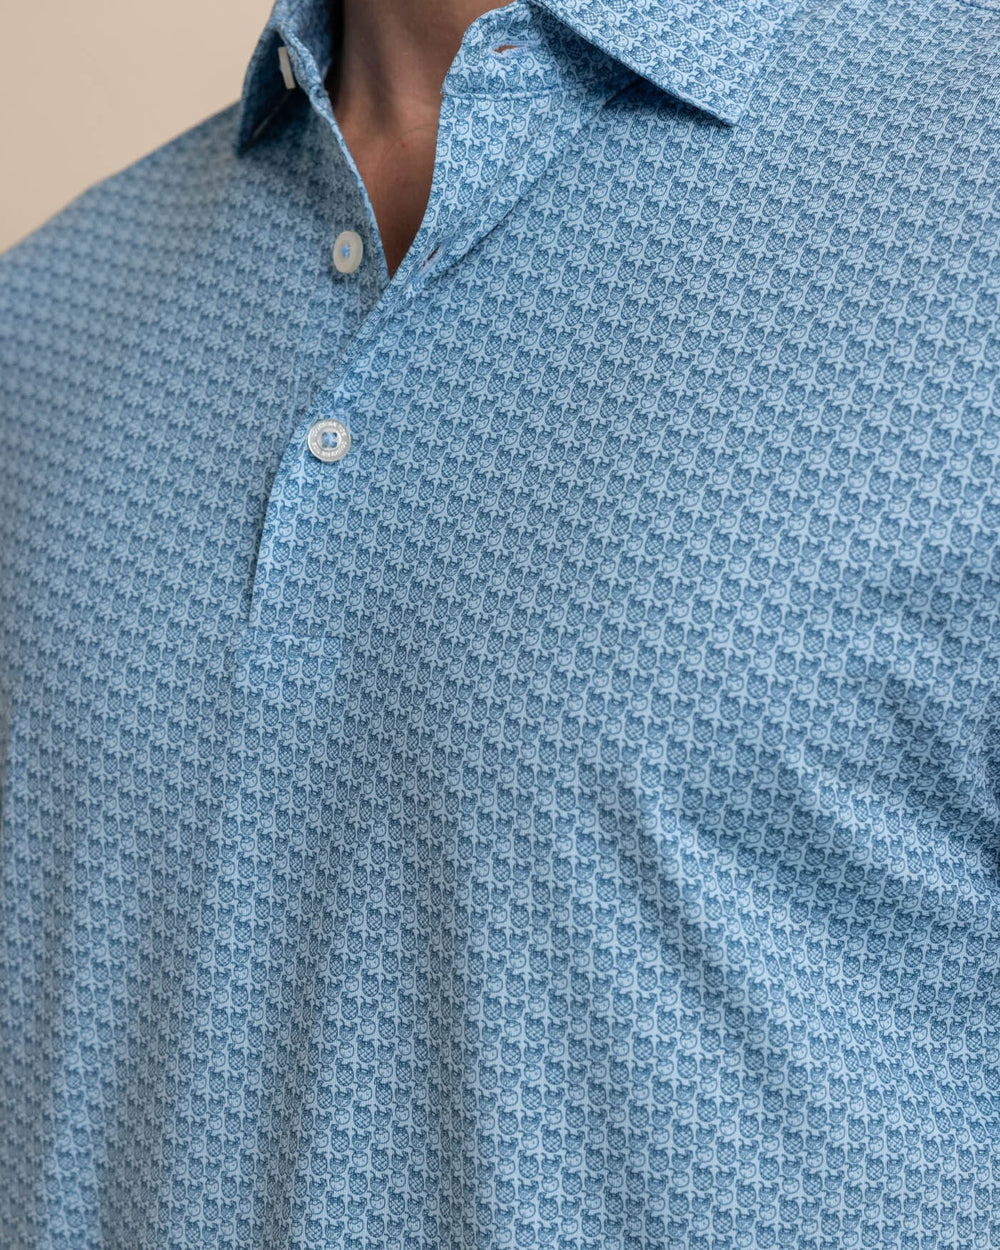 The detail view of the Southern Tide Driver Vacation Views Printed Polo by Southern Tide - Clearwater Blue